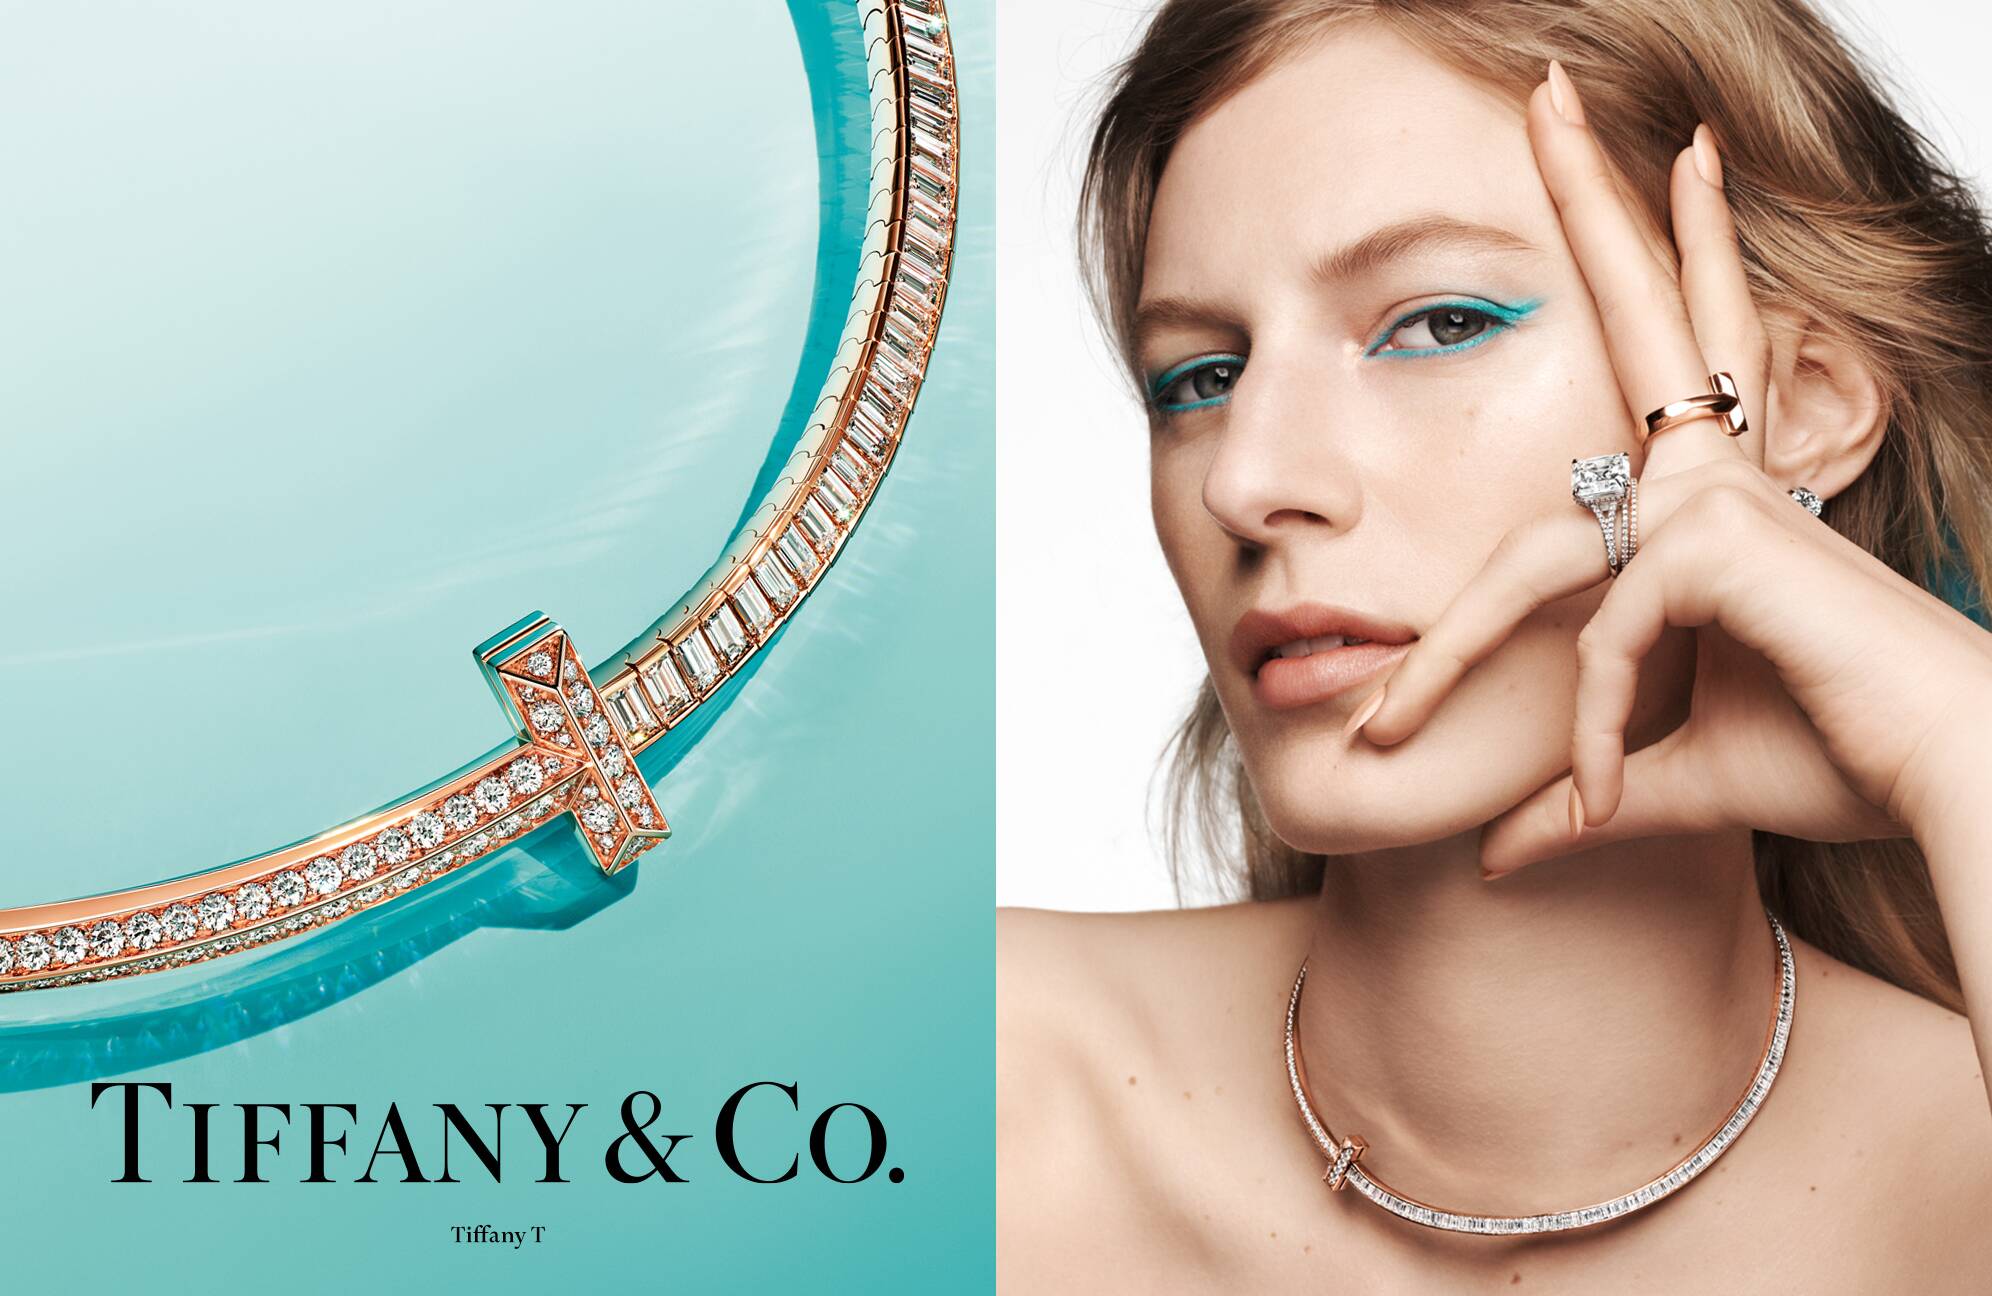 Femme Colliers Tiffany & Co Femme Collier TIFFANY & CO Femme Bijoux & Montres Tiffany & Co Femme Colliers & Pendentifs Tiffany & Co Femme Joaillerie Tiffany & Co Femme doré Colliers Tiffany & Co 